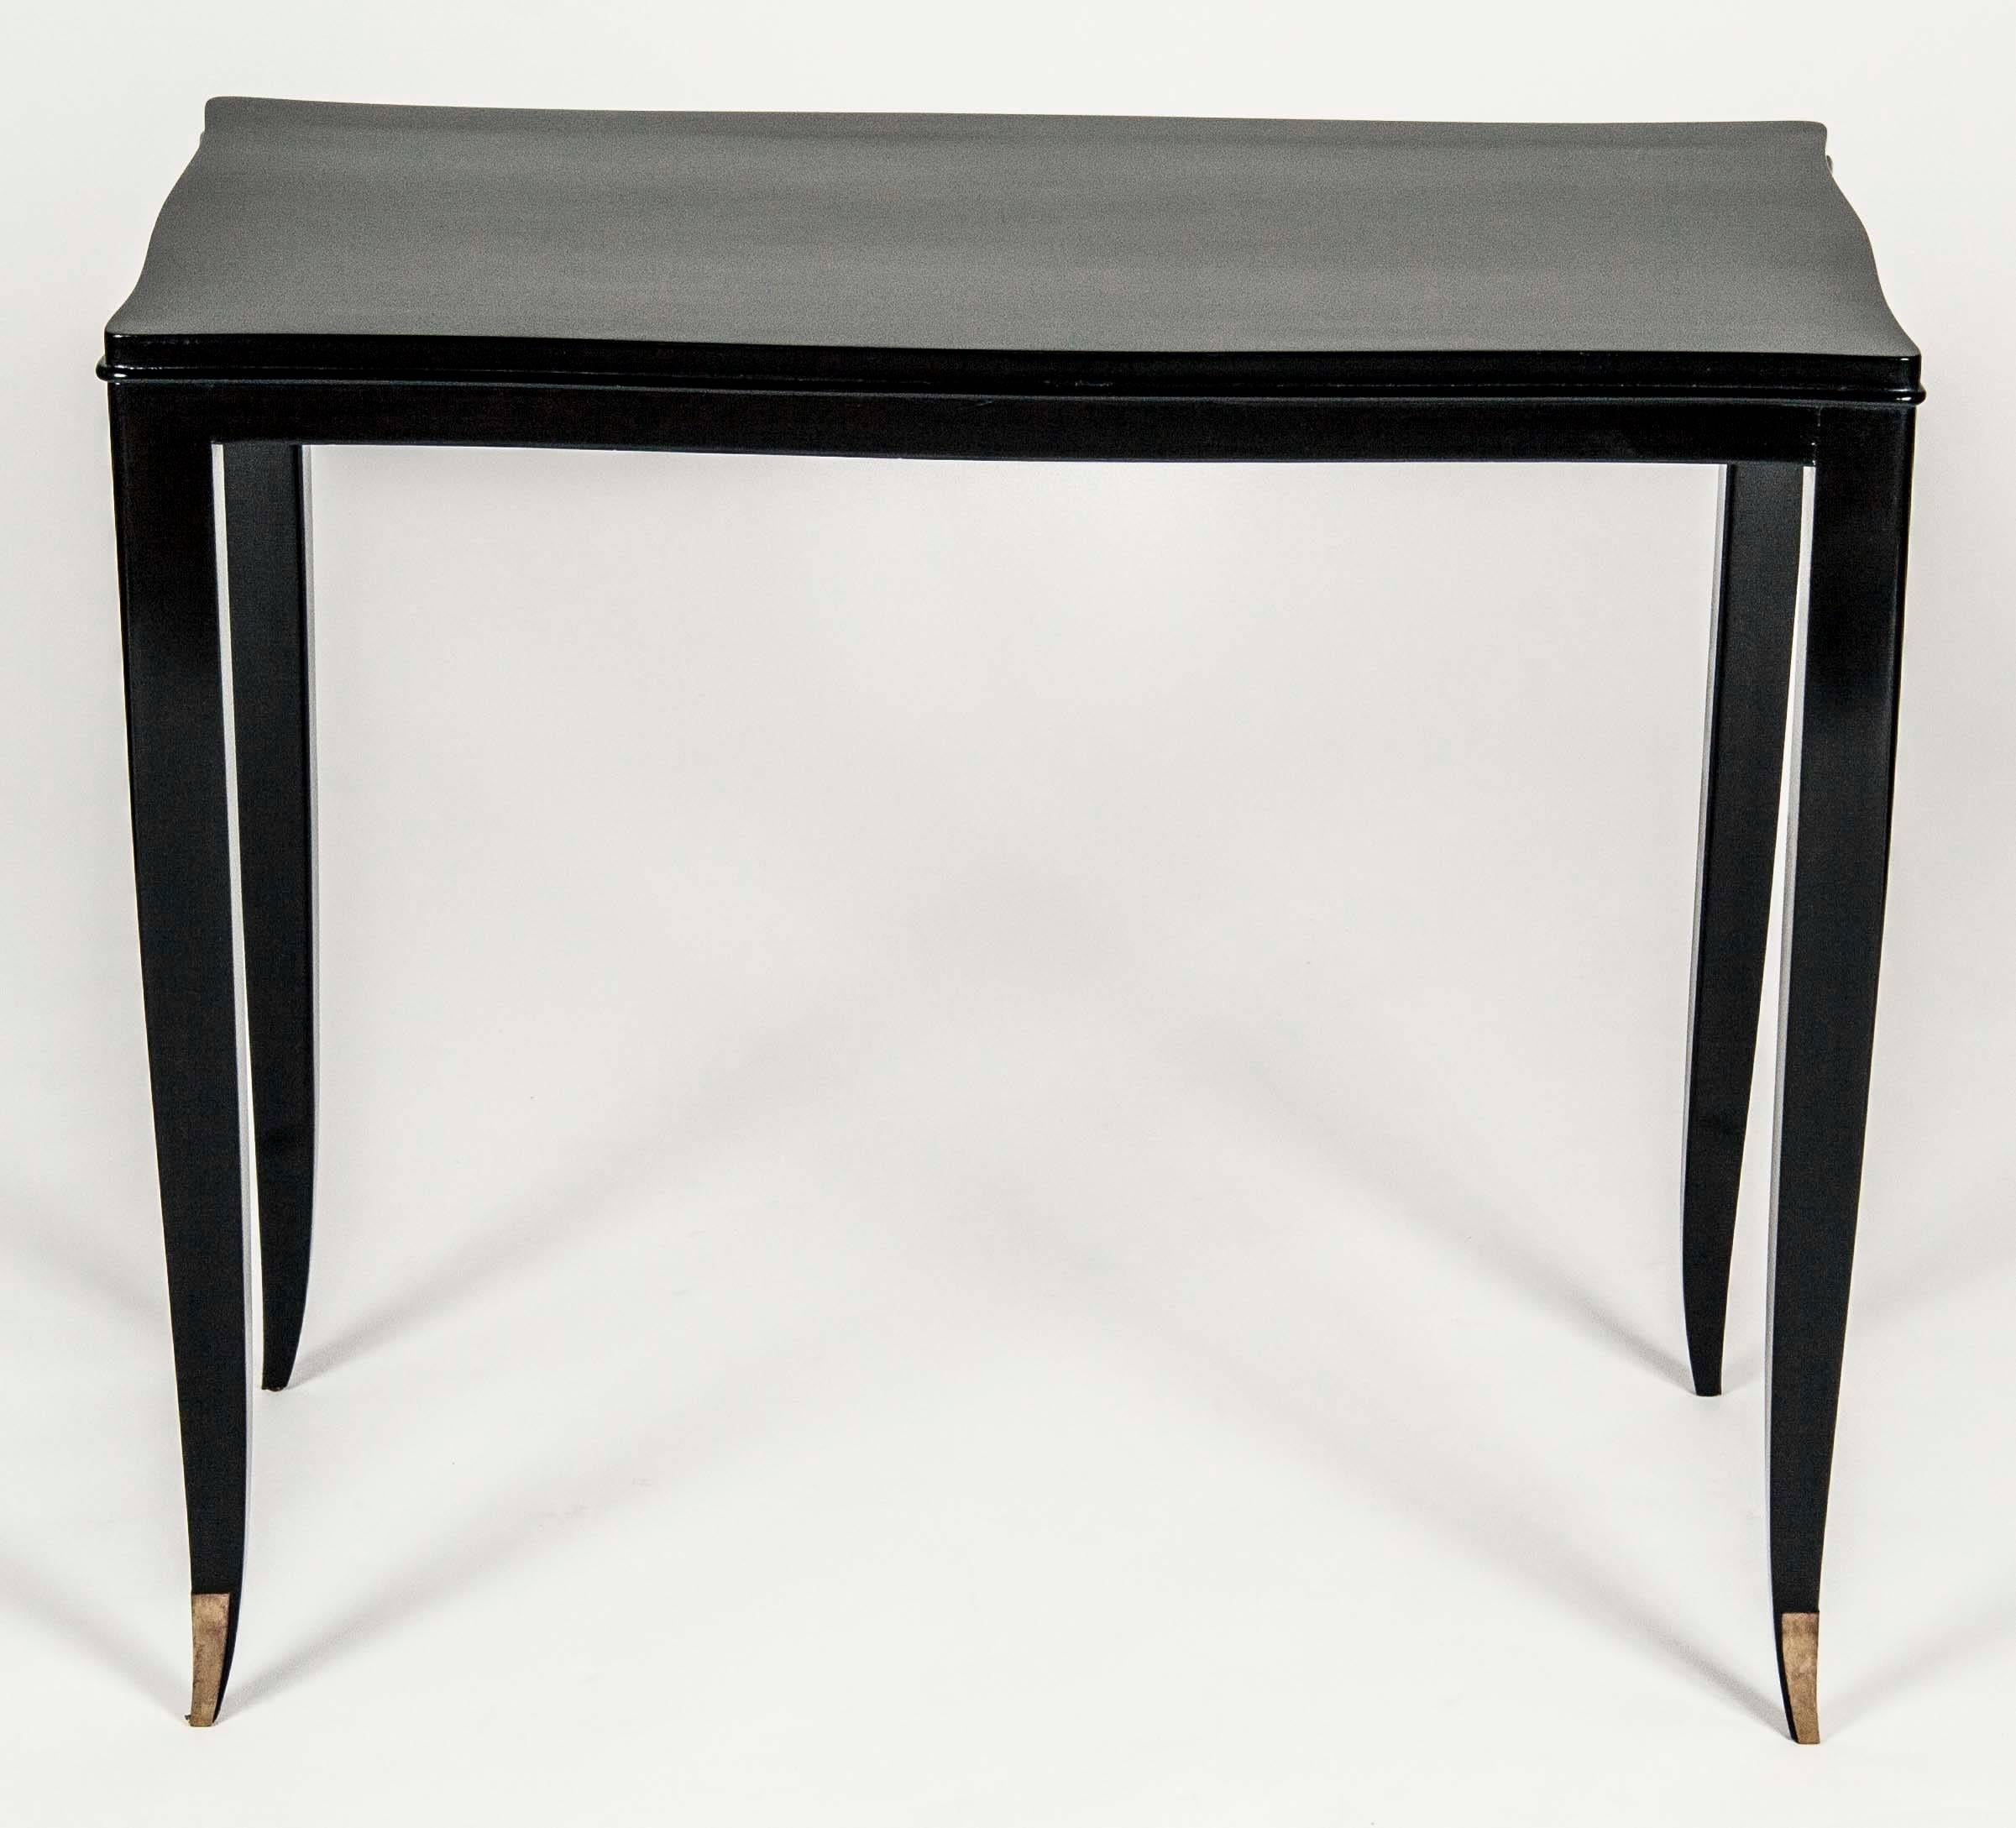 A pair of ebonized beech console tables designed by Andre Arbus. Each leg terminating in d'ore bronze sabot. An example of this console was produced for the women’s sitting room of the Ile De France Pavillion Exhibit at the 1937 Paris Exhibition. 